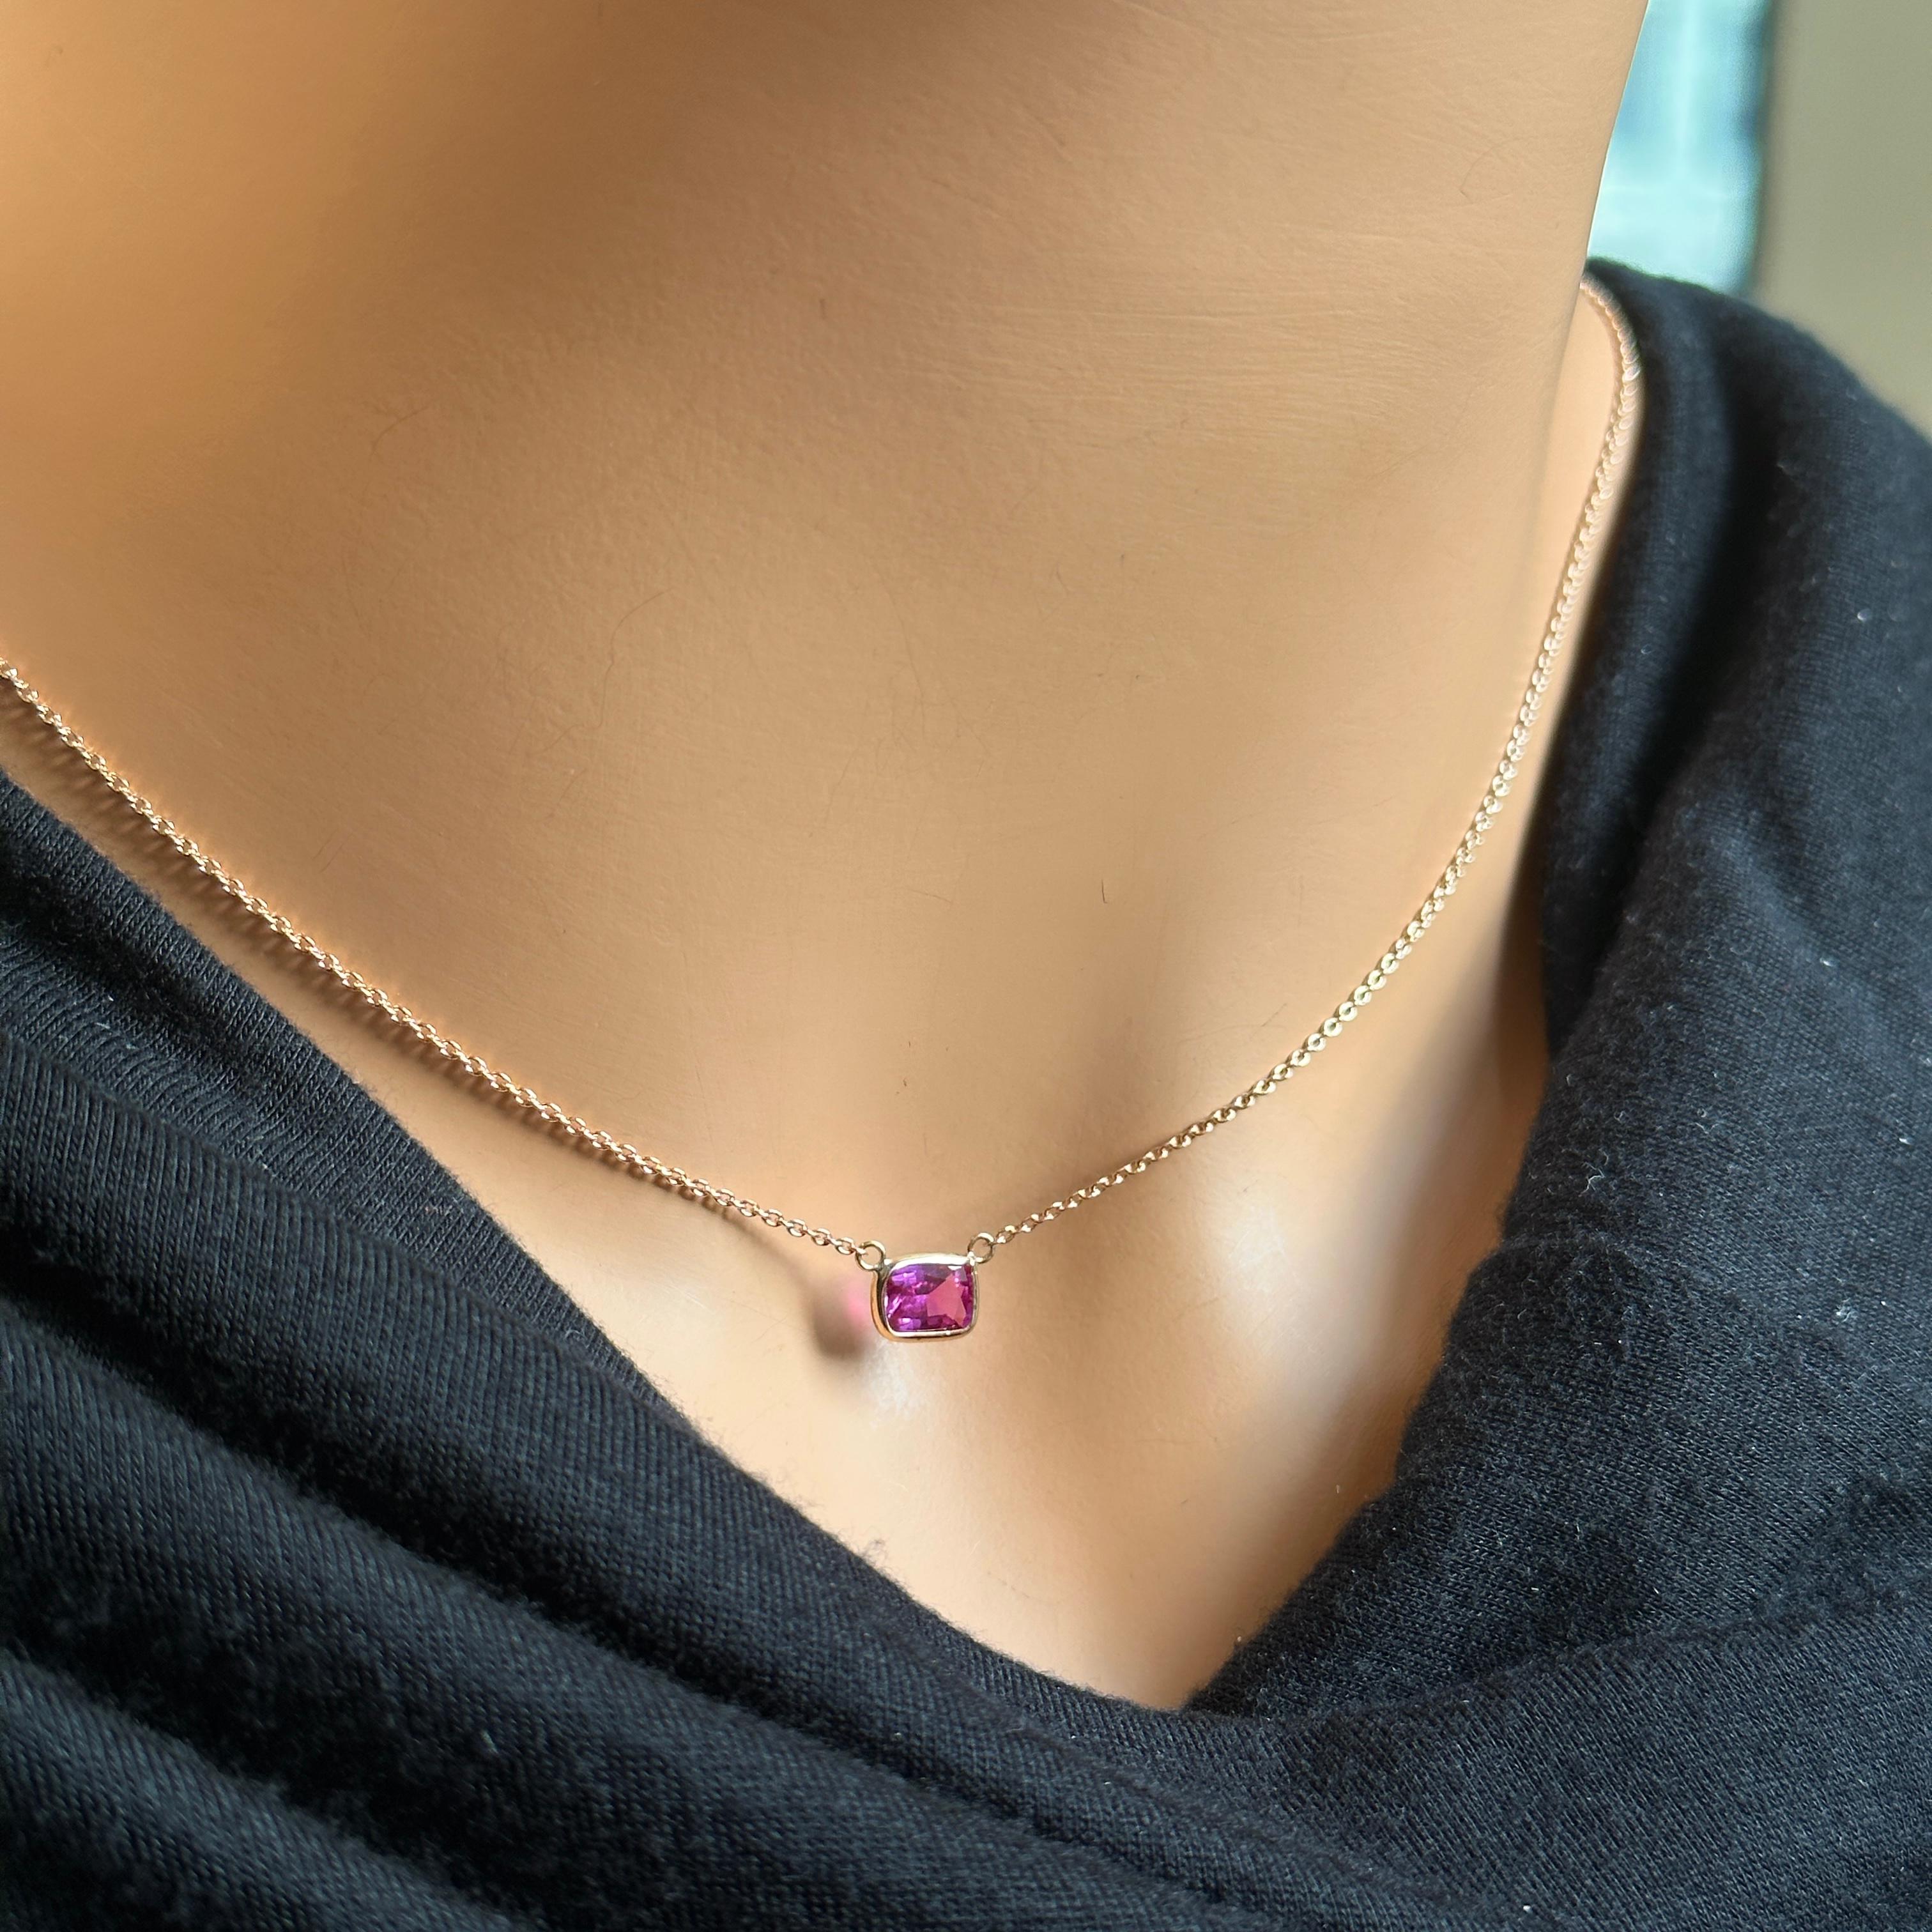 Cushion Cut 1.21 Carat Pink Sapphire Cushion &Fashion Necklaces Berberyn Certified In 14K RG For Sale